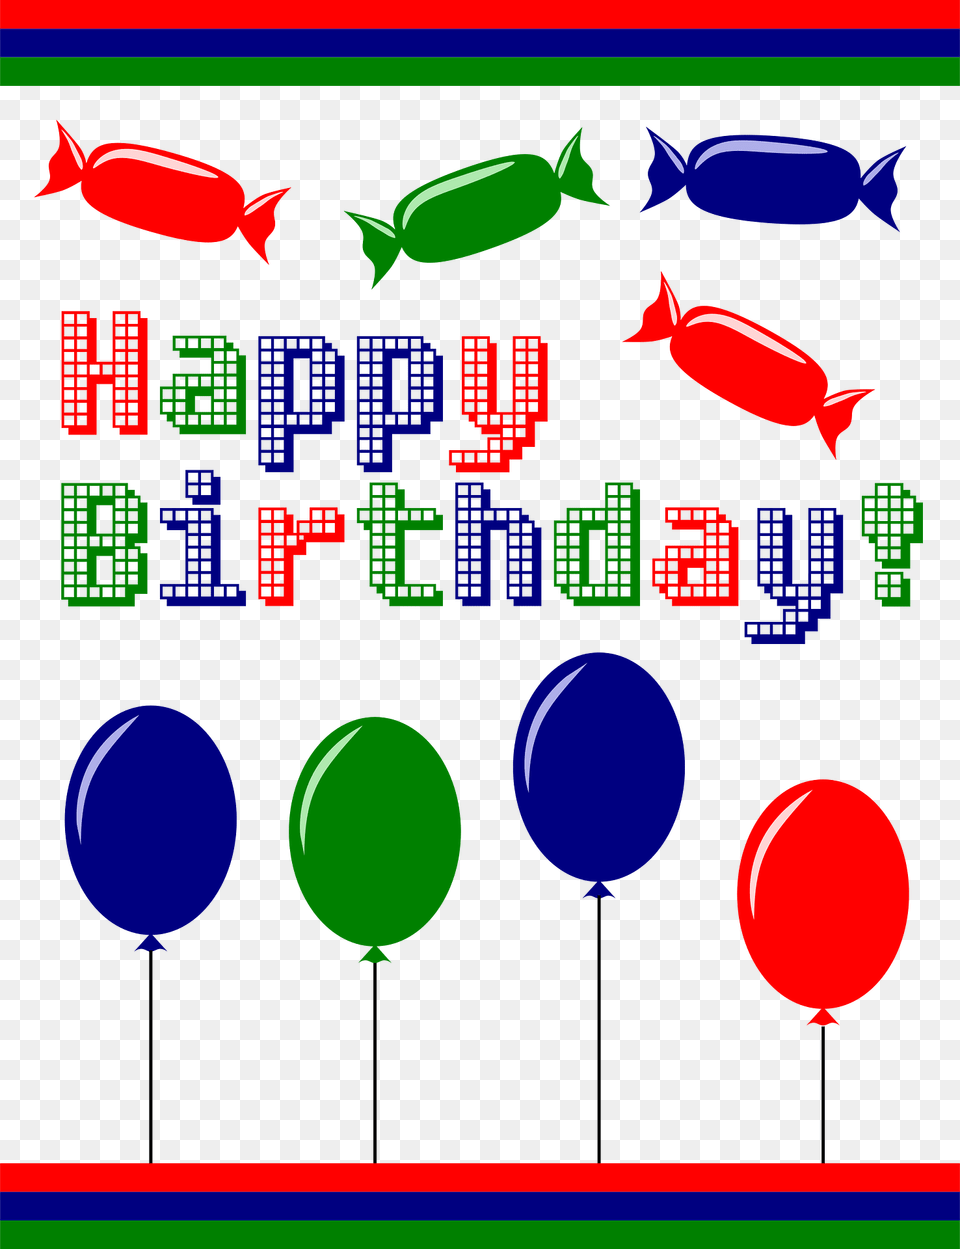 All The Best Clipart, Balloon, Animal, Fish, Sea Life Png